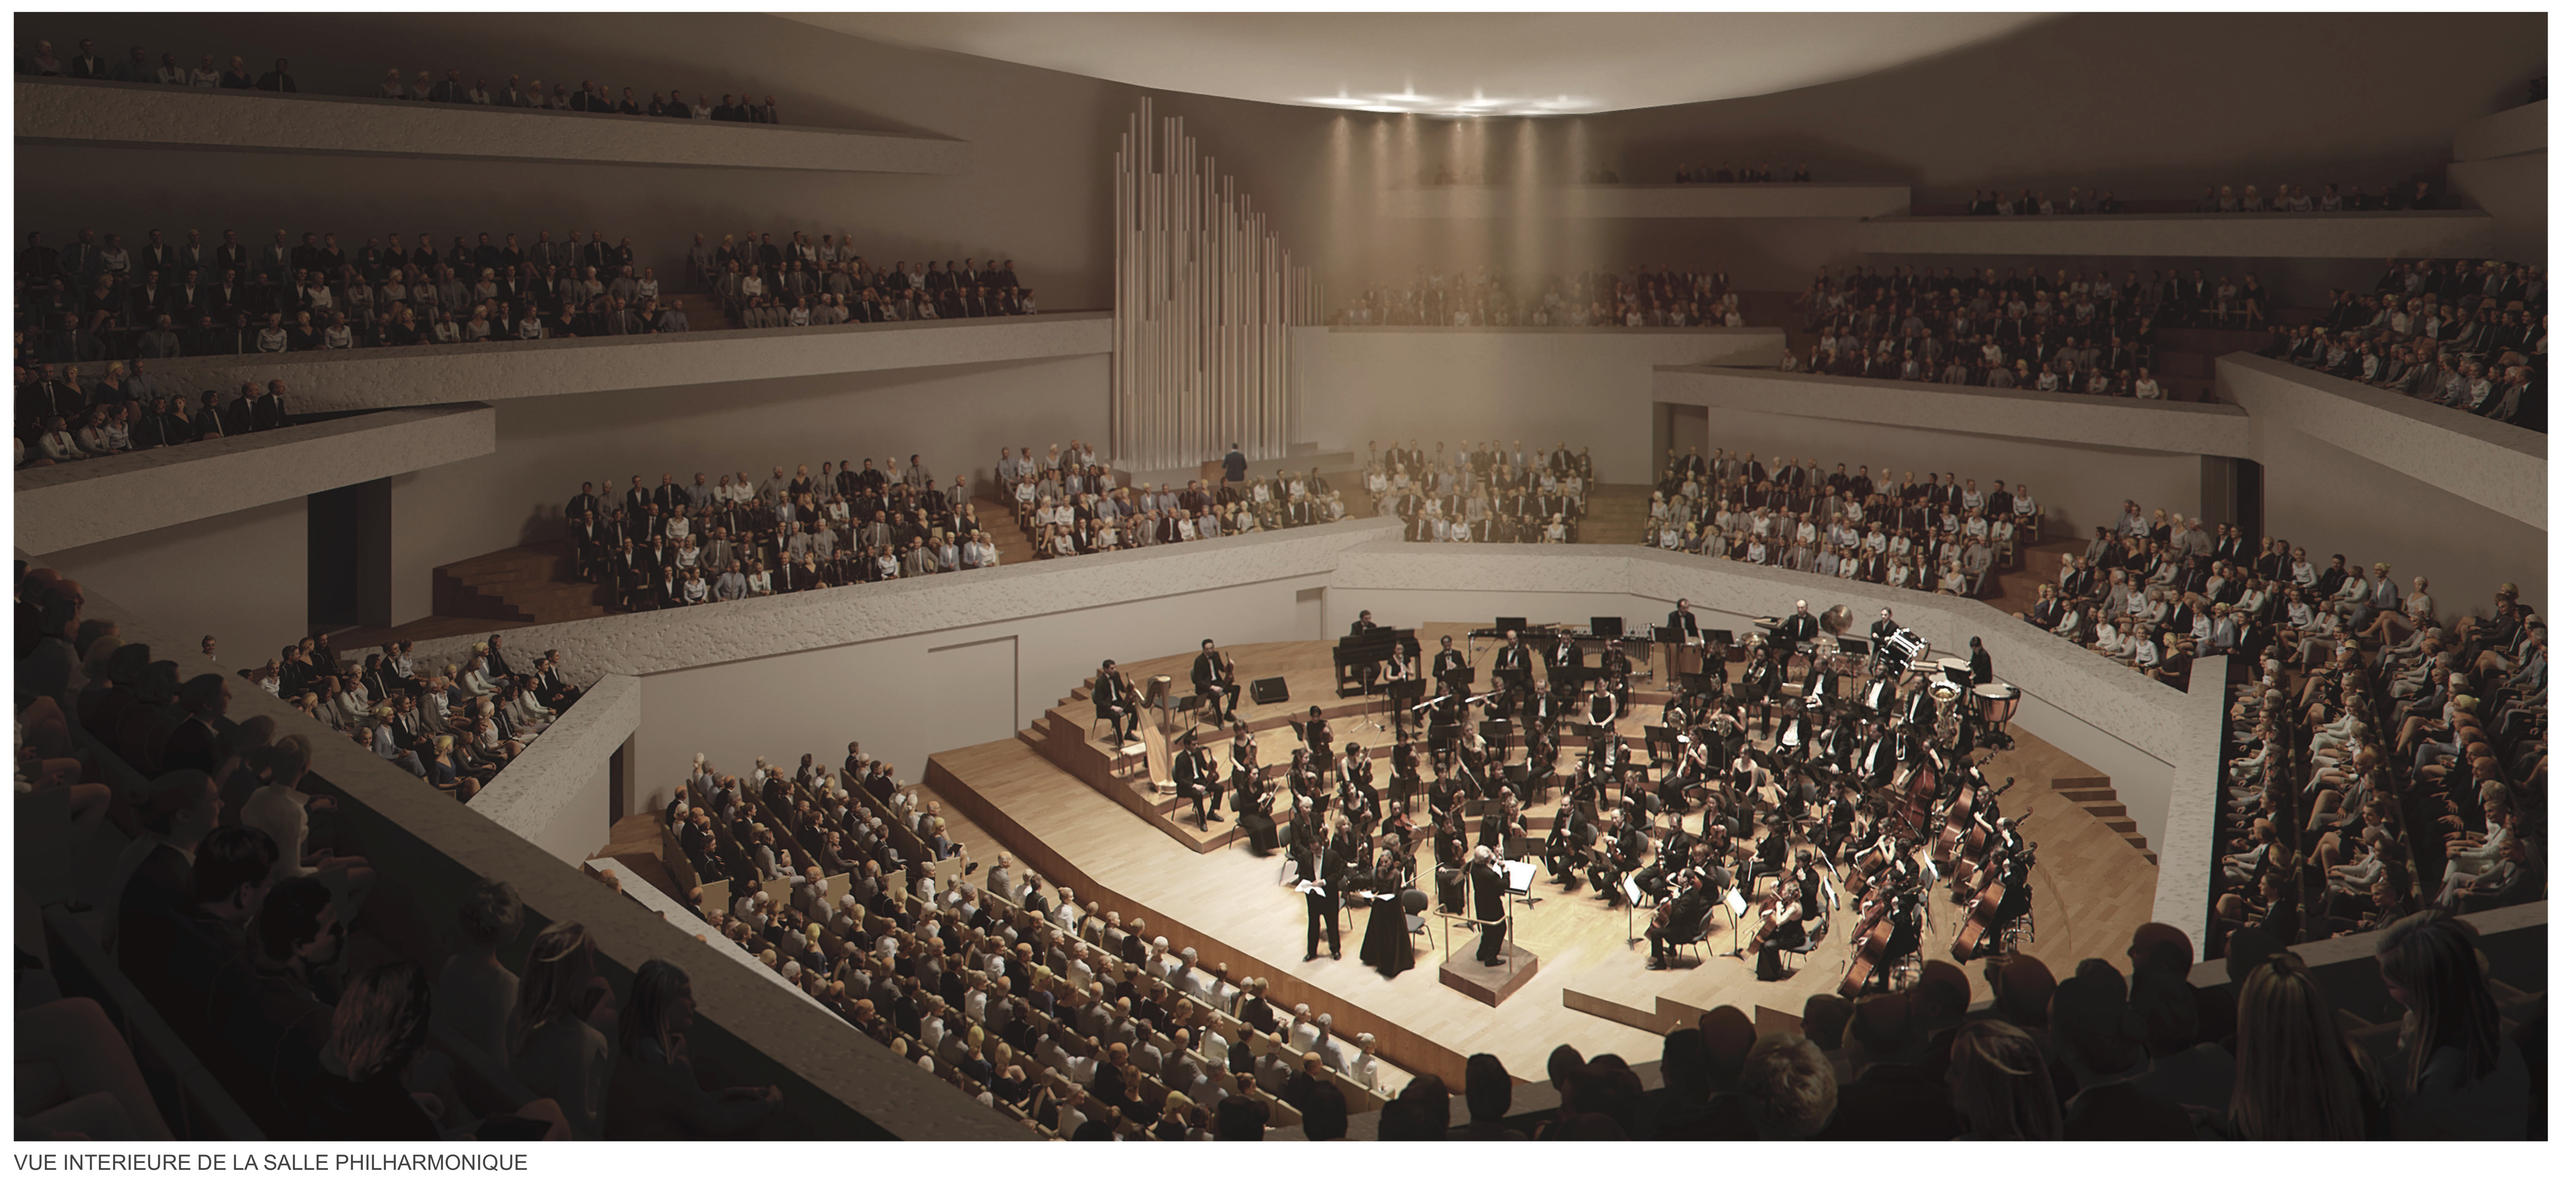 View inside the philharmonic hall at the City of Music complex in Geneva